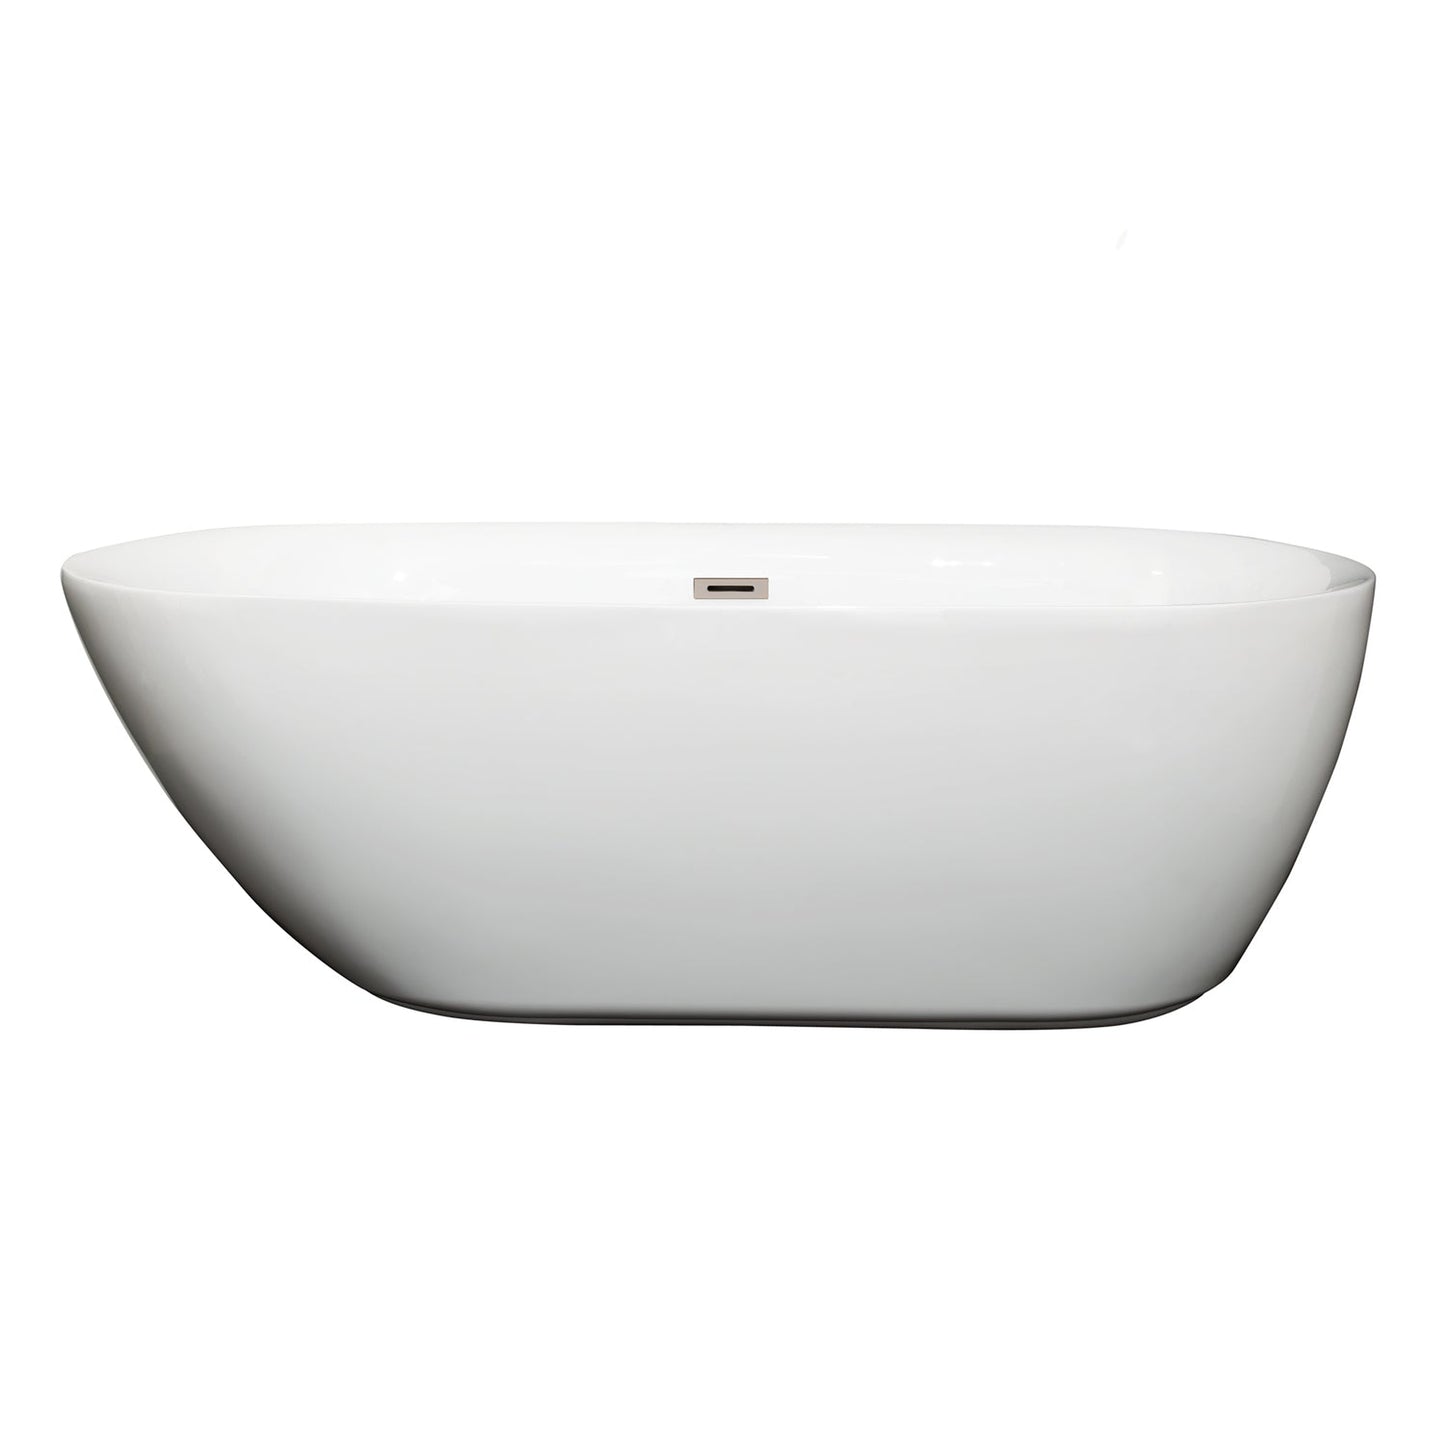 Wyndham Collection Melissa 65" Freestanding Bathtub in White With Brushed Nickel Drain and Overflow Trim